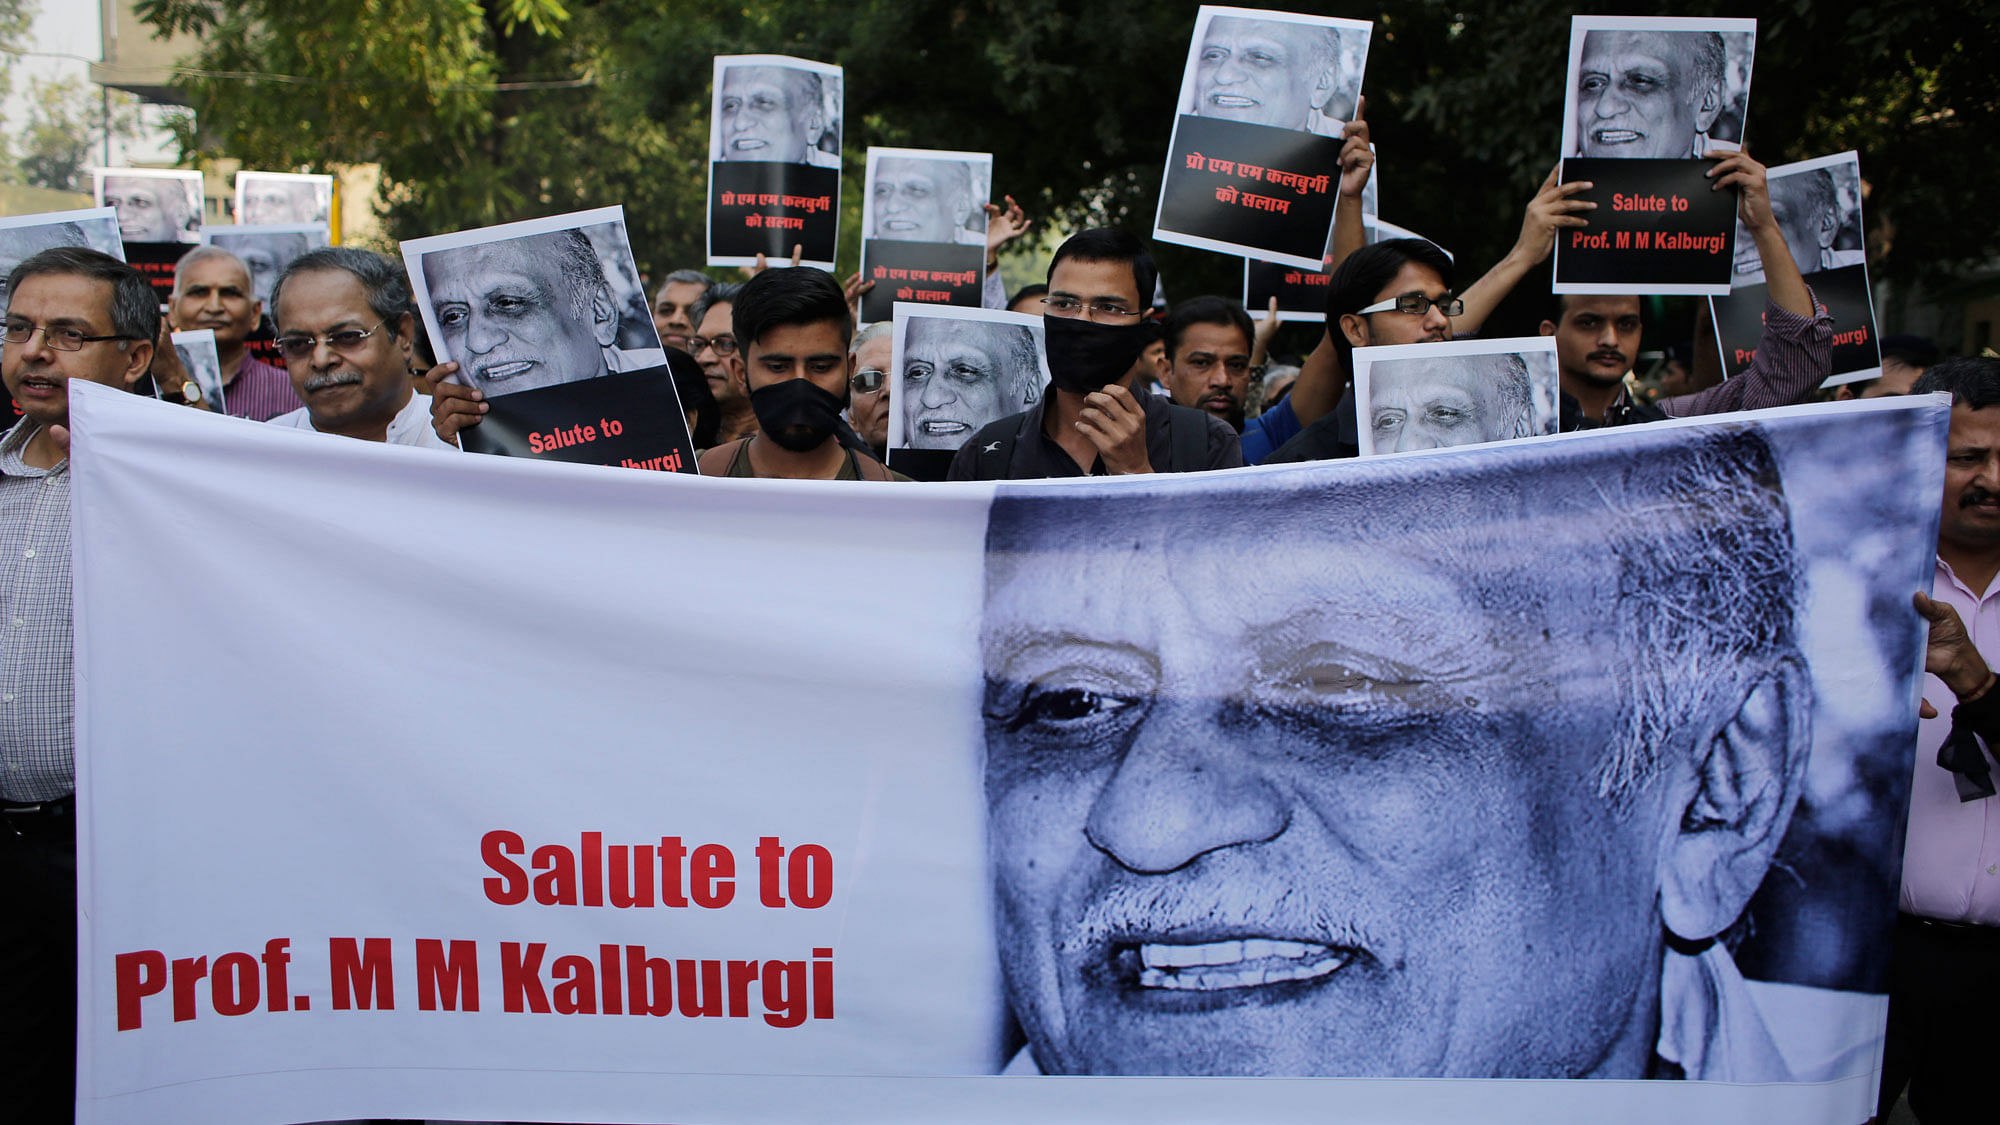 Writers protest against the slow investigation in MM Kalburgi’s murder and rising intolerance in India. (Photo: AP)